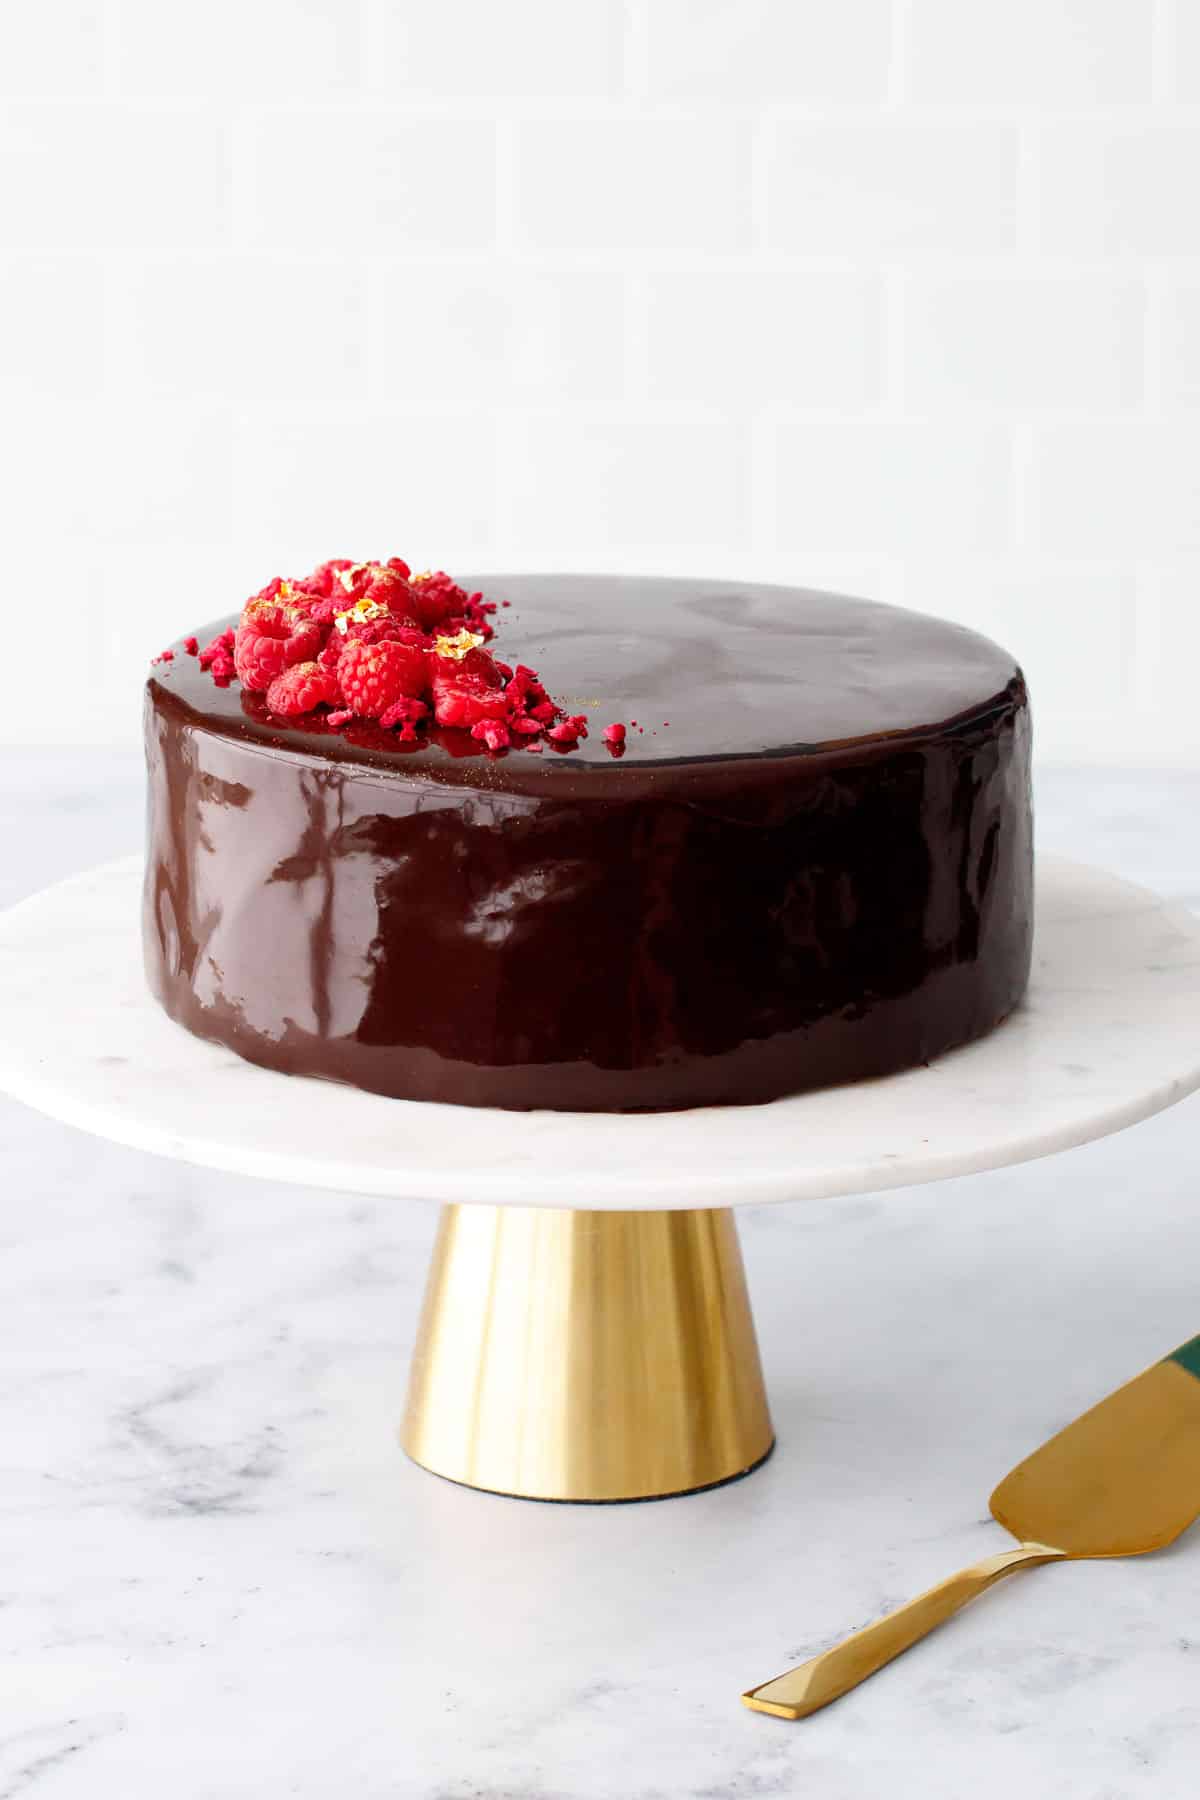 Chocolate Raspberry Mousse Cake with a super shiny chocolate mirror glaze and decorated with fresh and freeze dried raspberries and gold leaf accents.